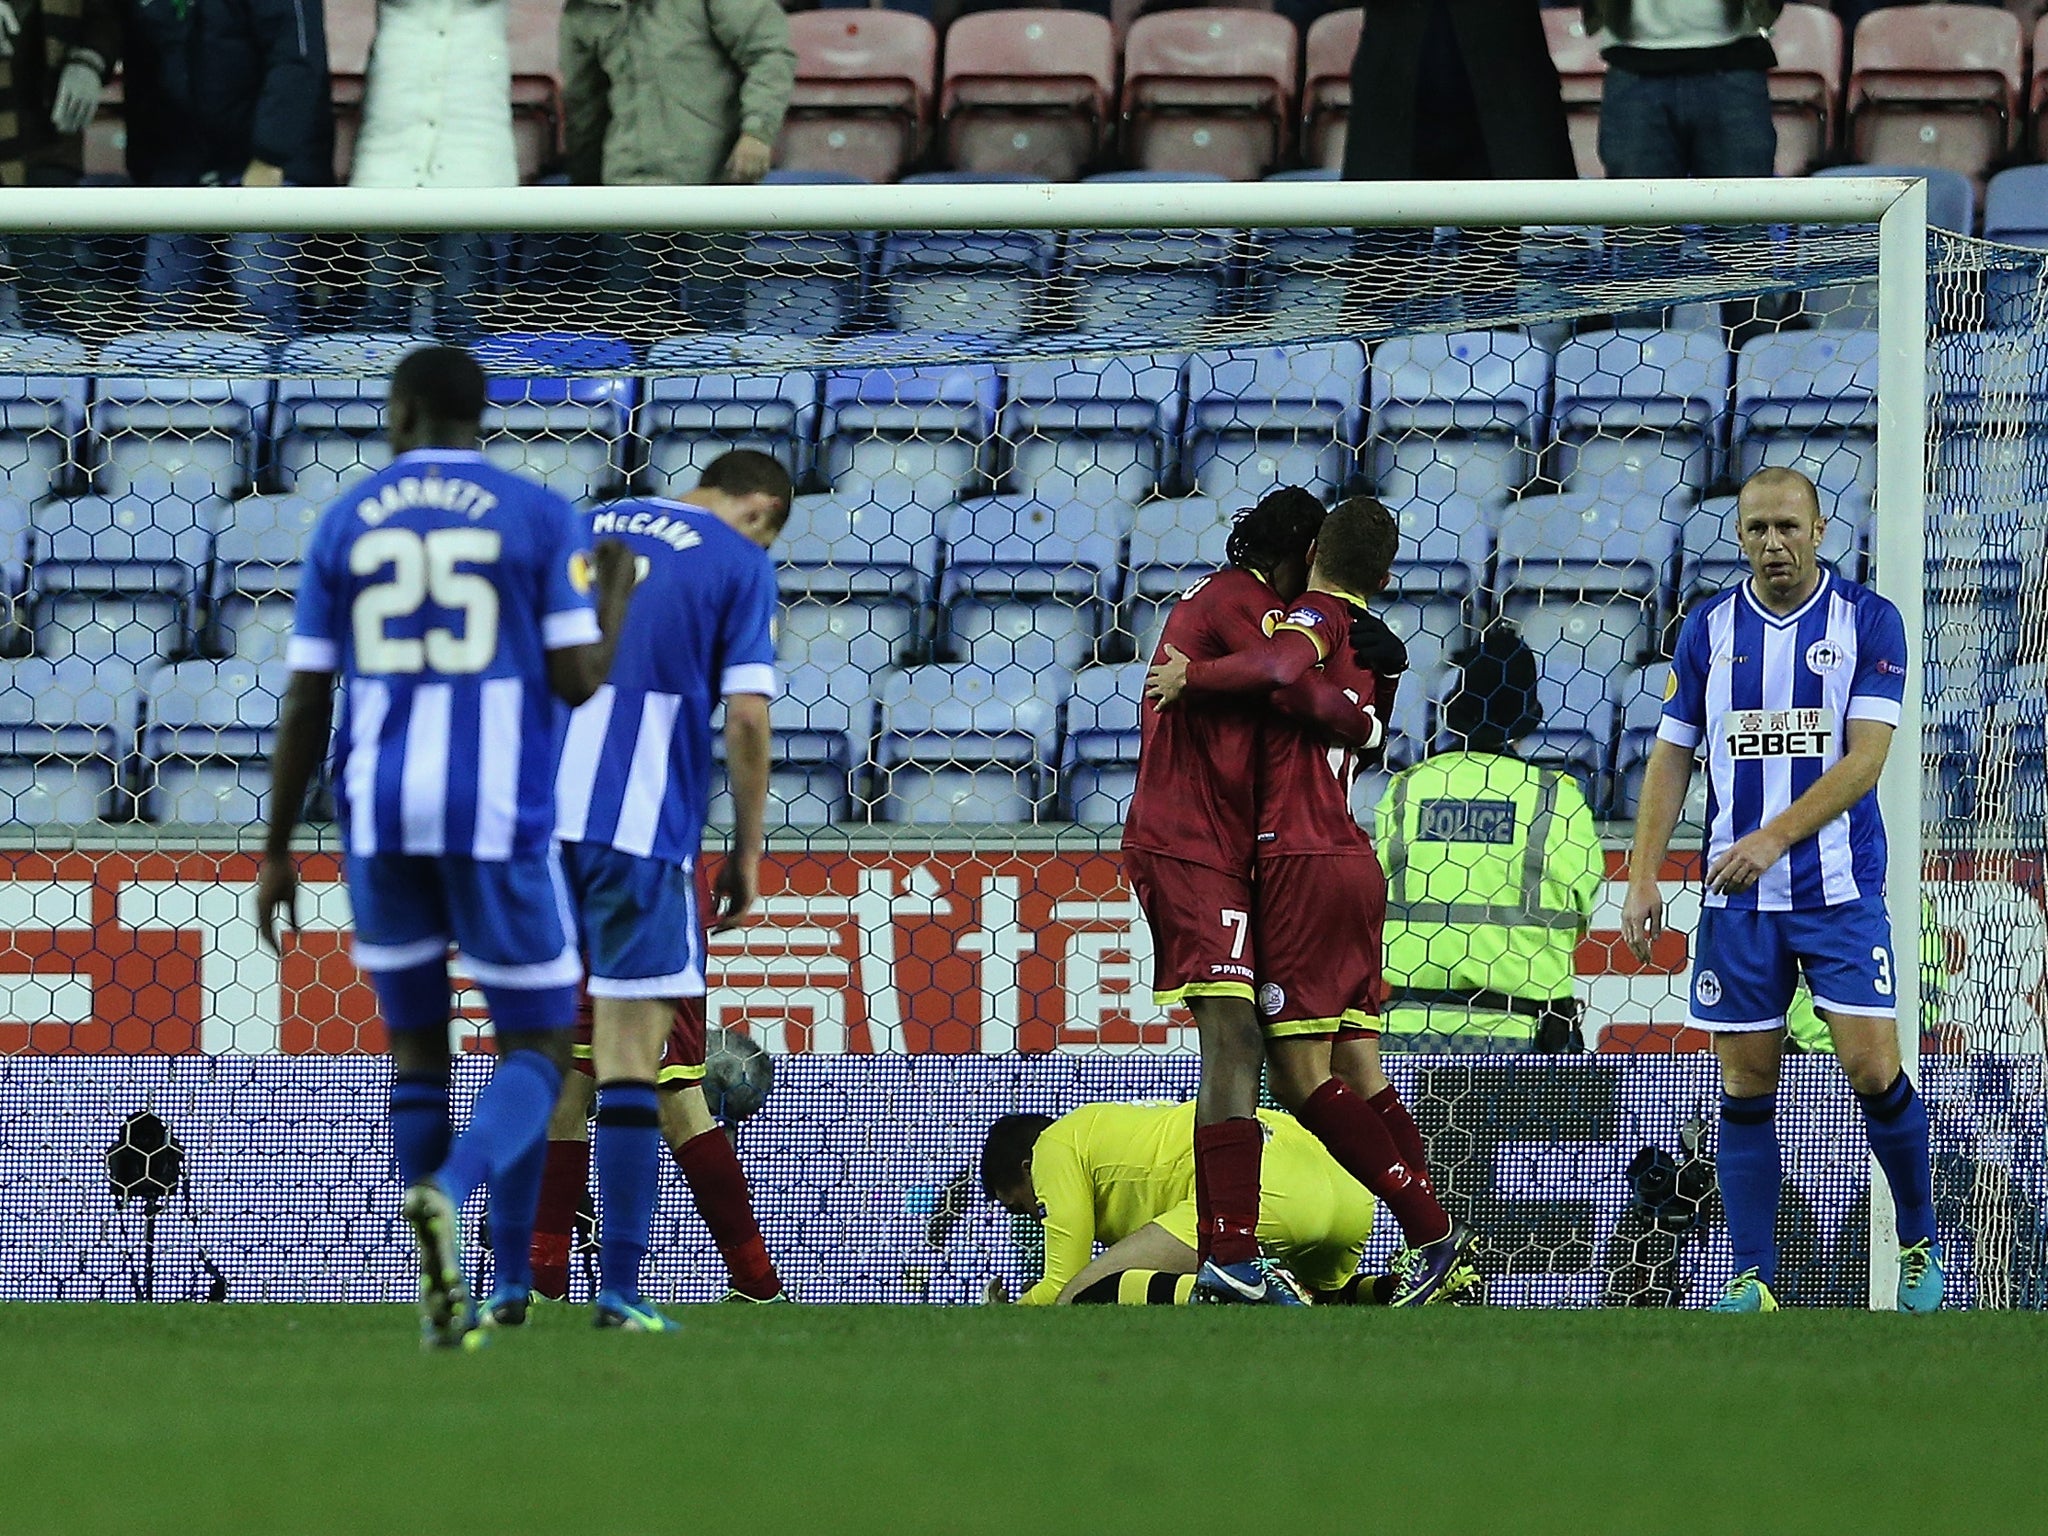 Wigan lost out to Zulte-Waregem 2-1 last time out